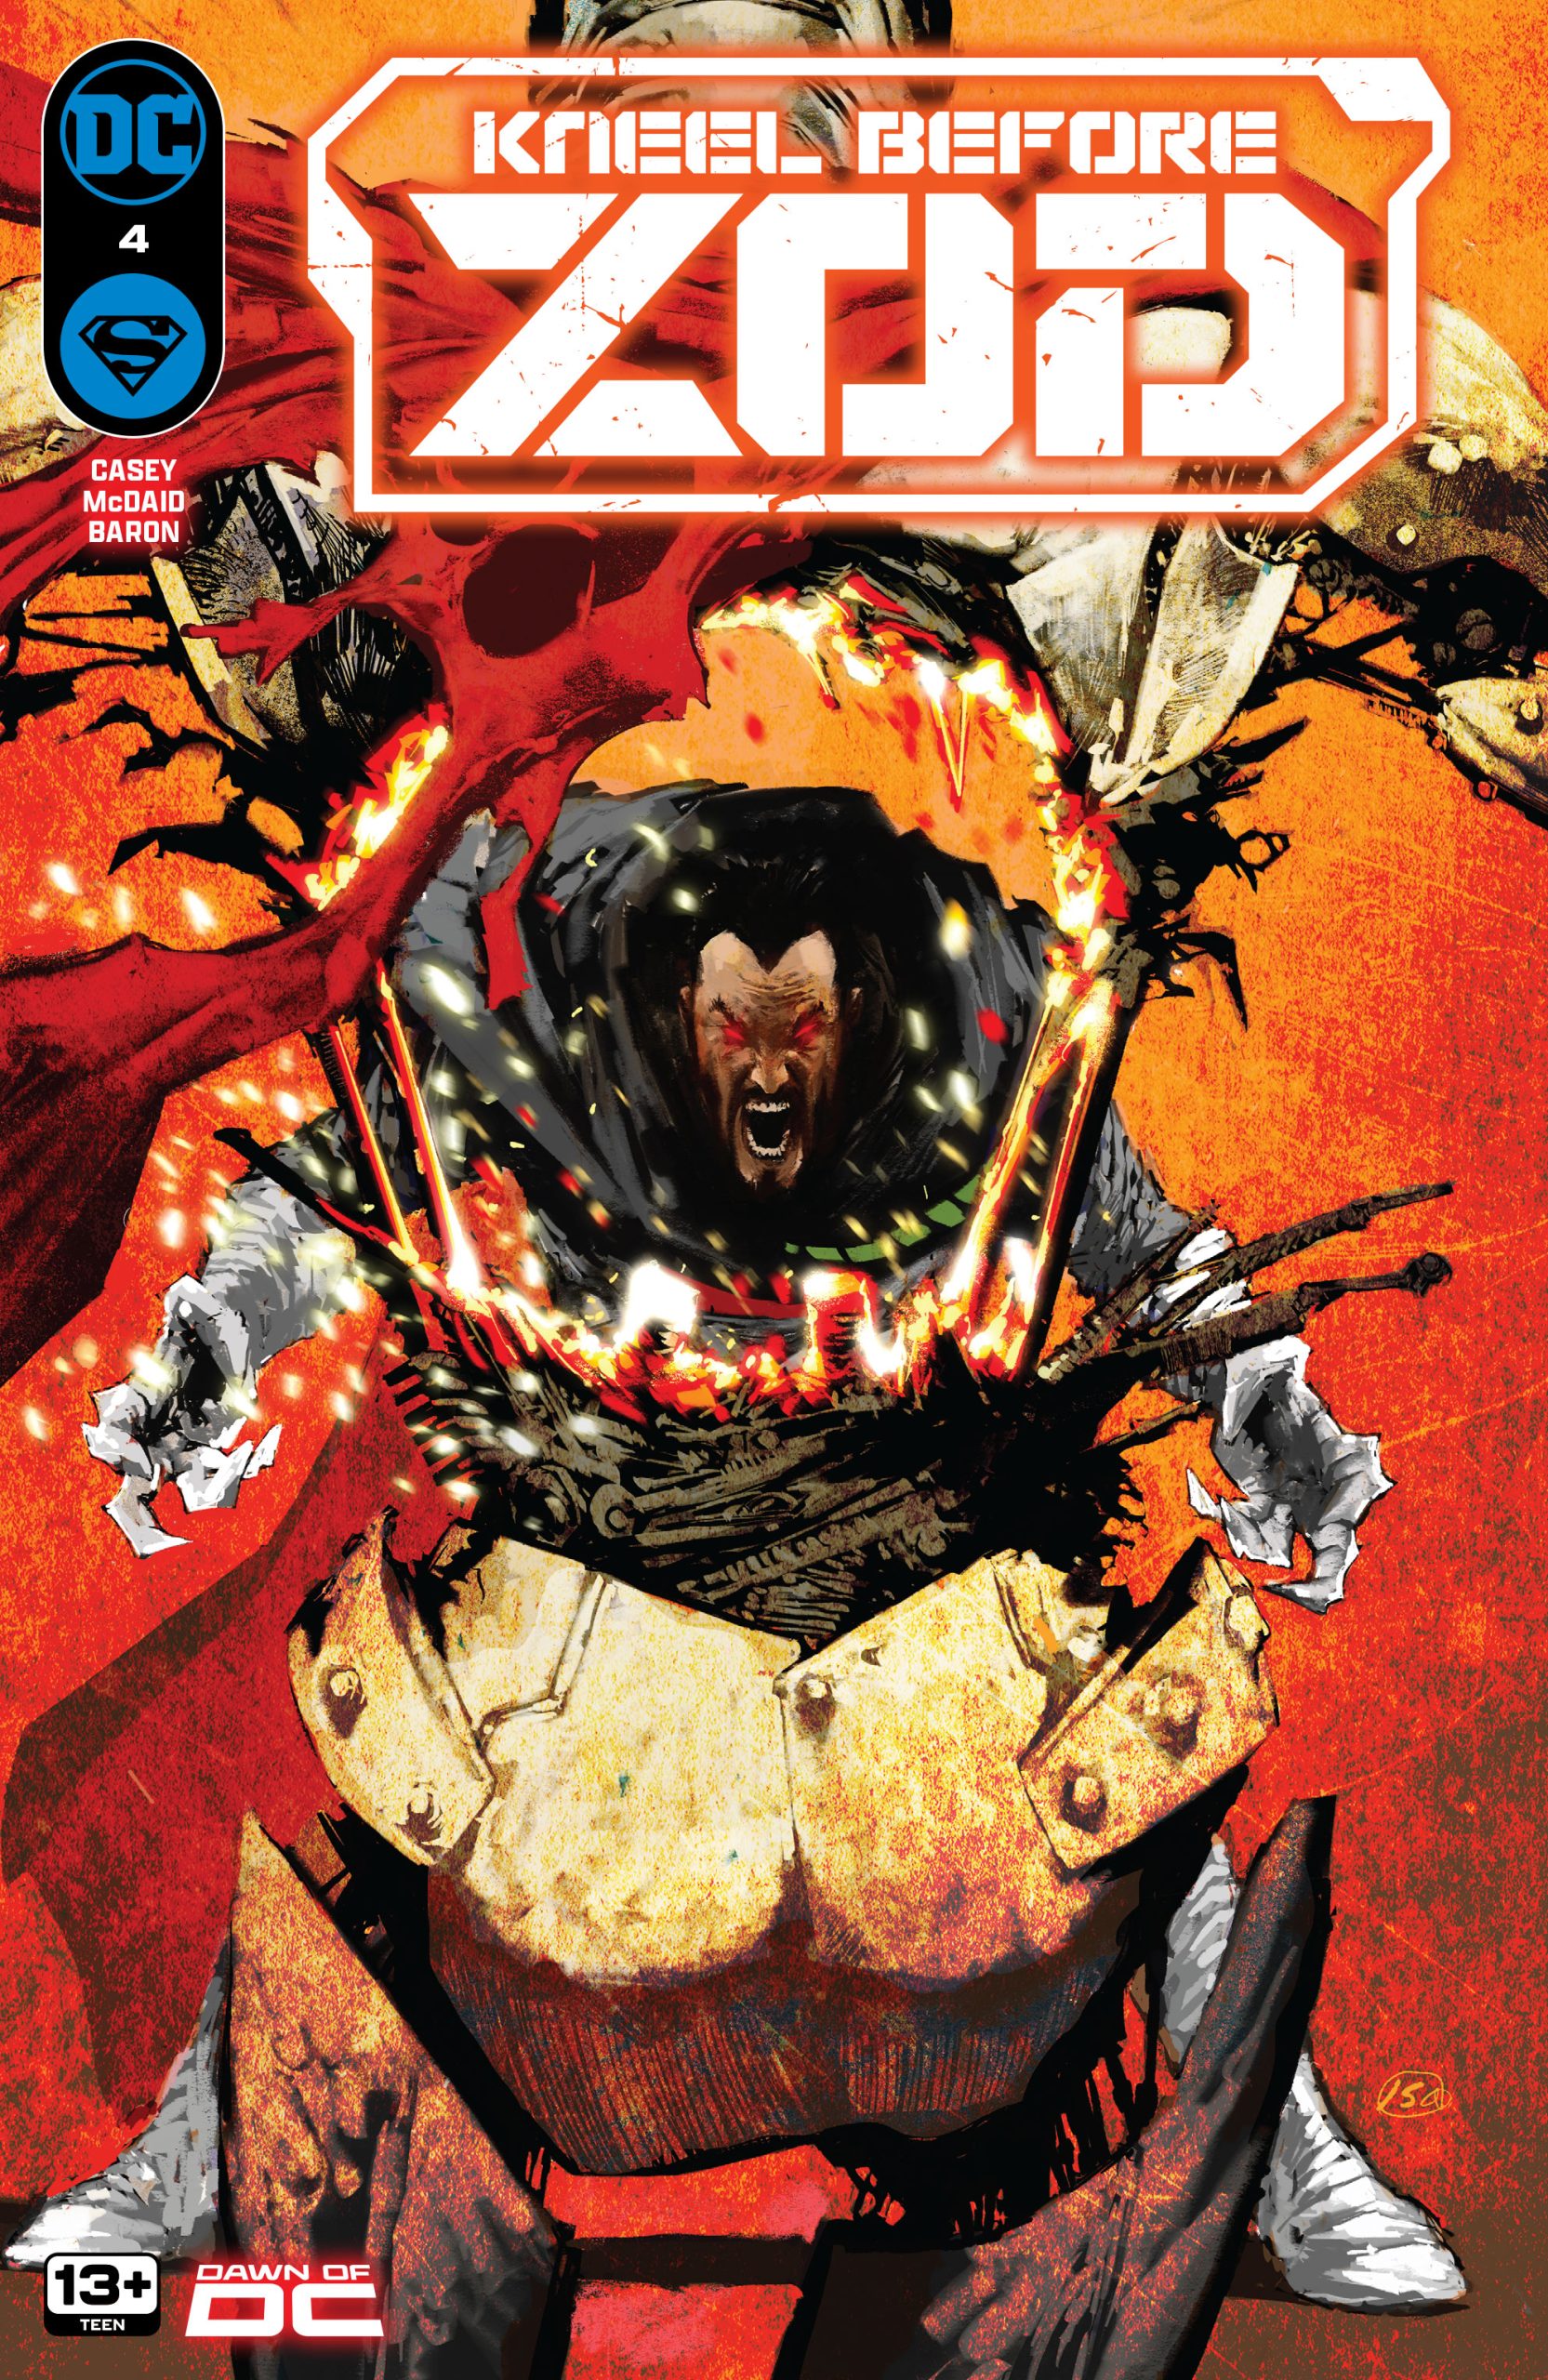 DC Preview: Kneel Before Zod #4